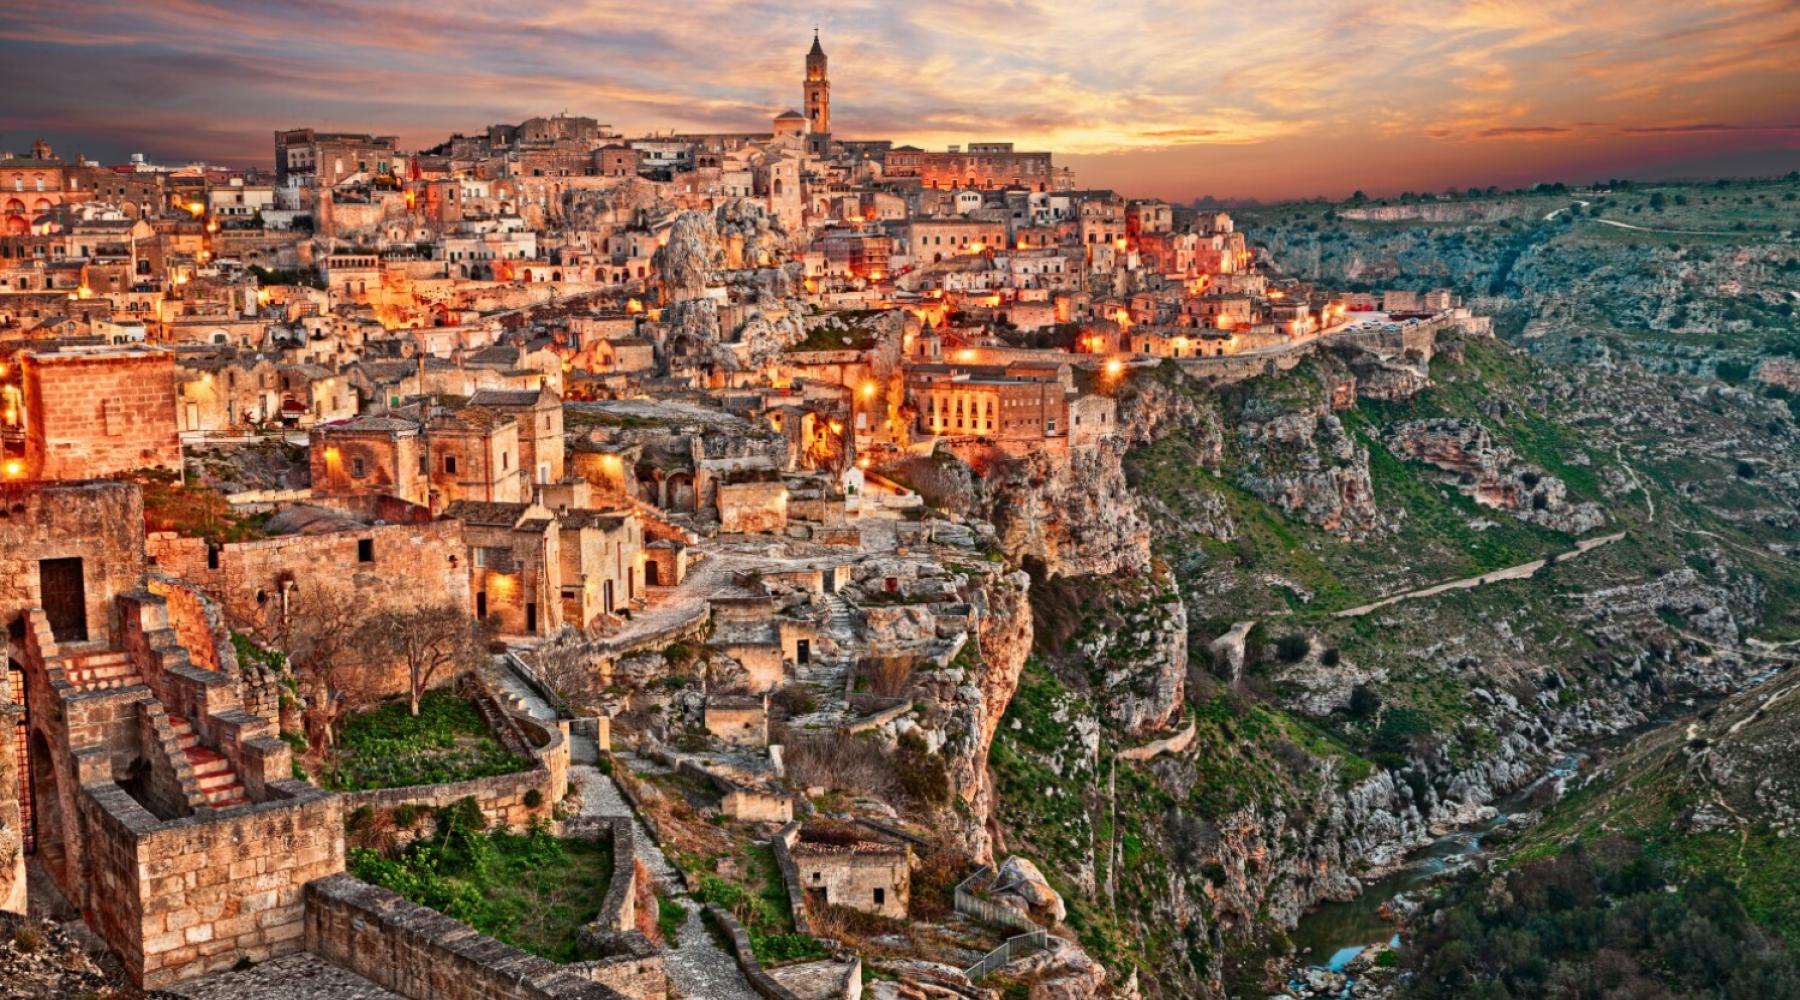 Dawn over ancient Sasso Caveoso, known for its cave dwellings, in Matera, Italy